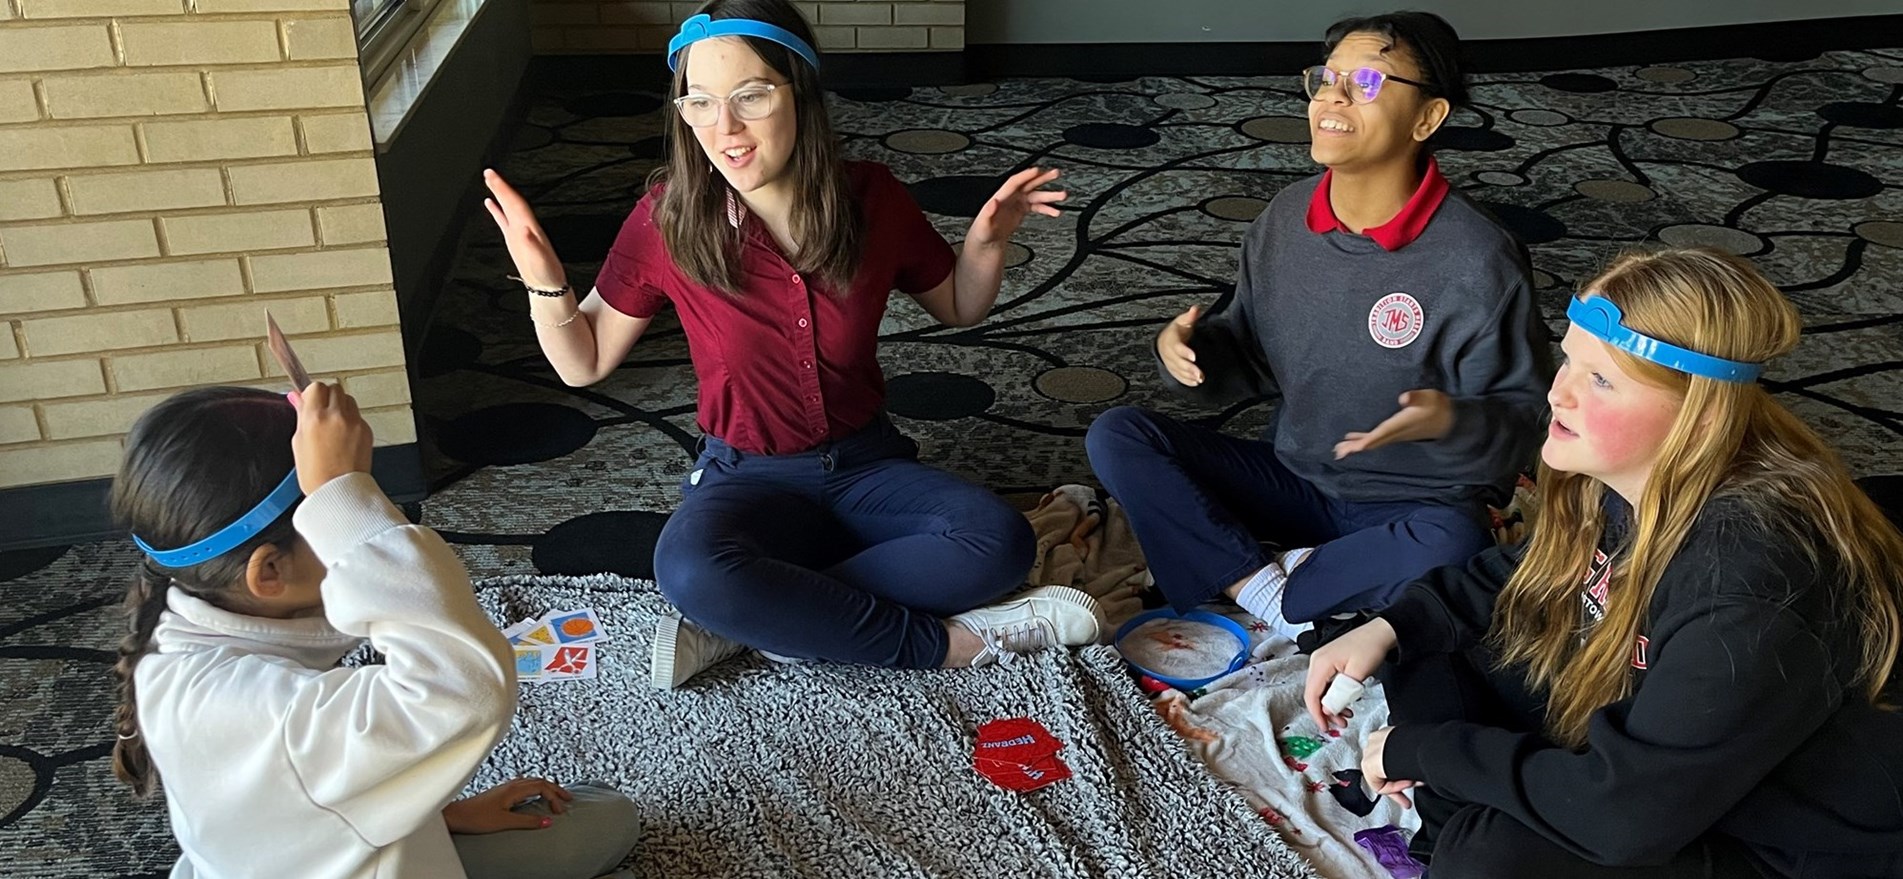 Students sitting on blankets on floor play board games.